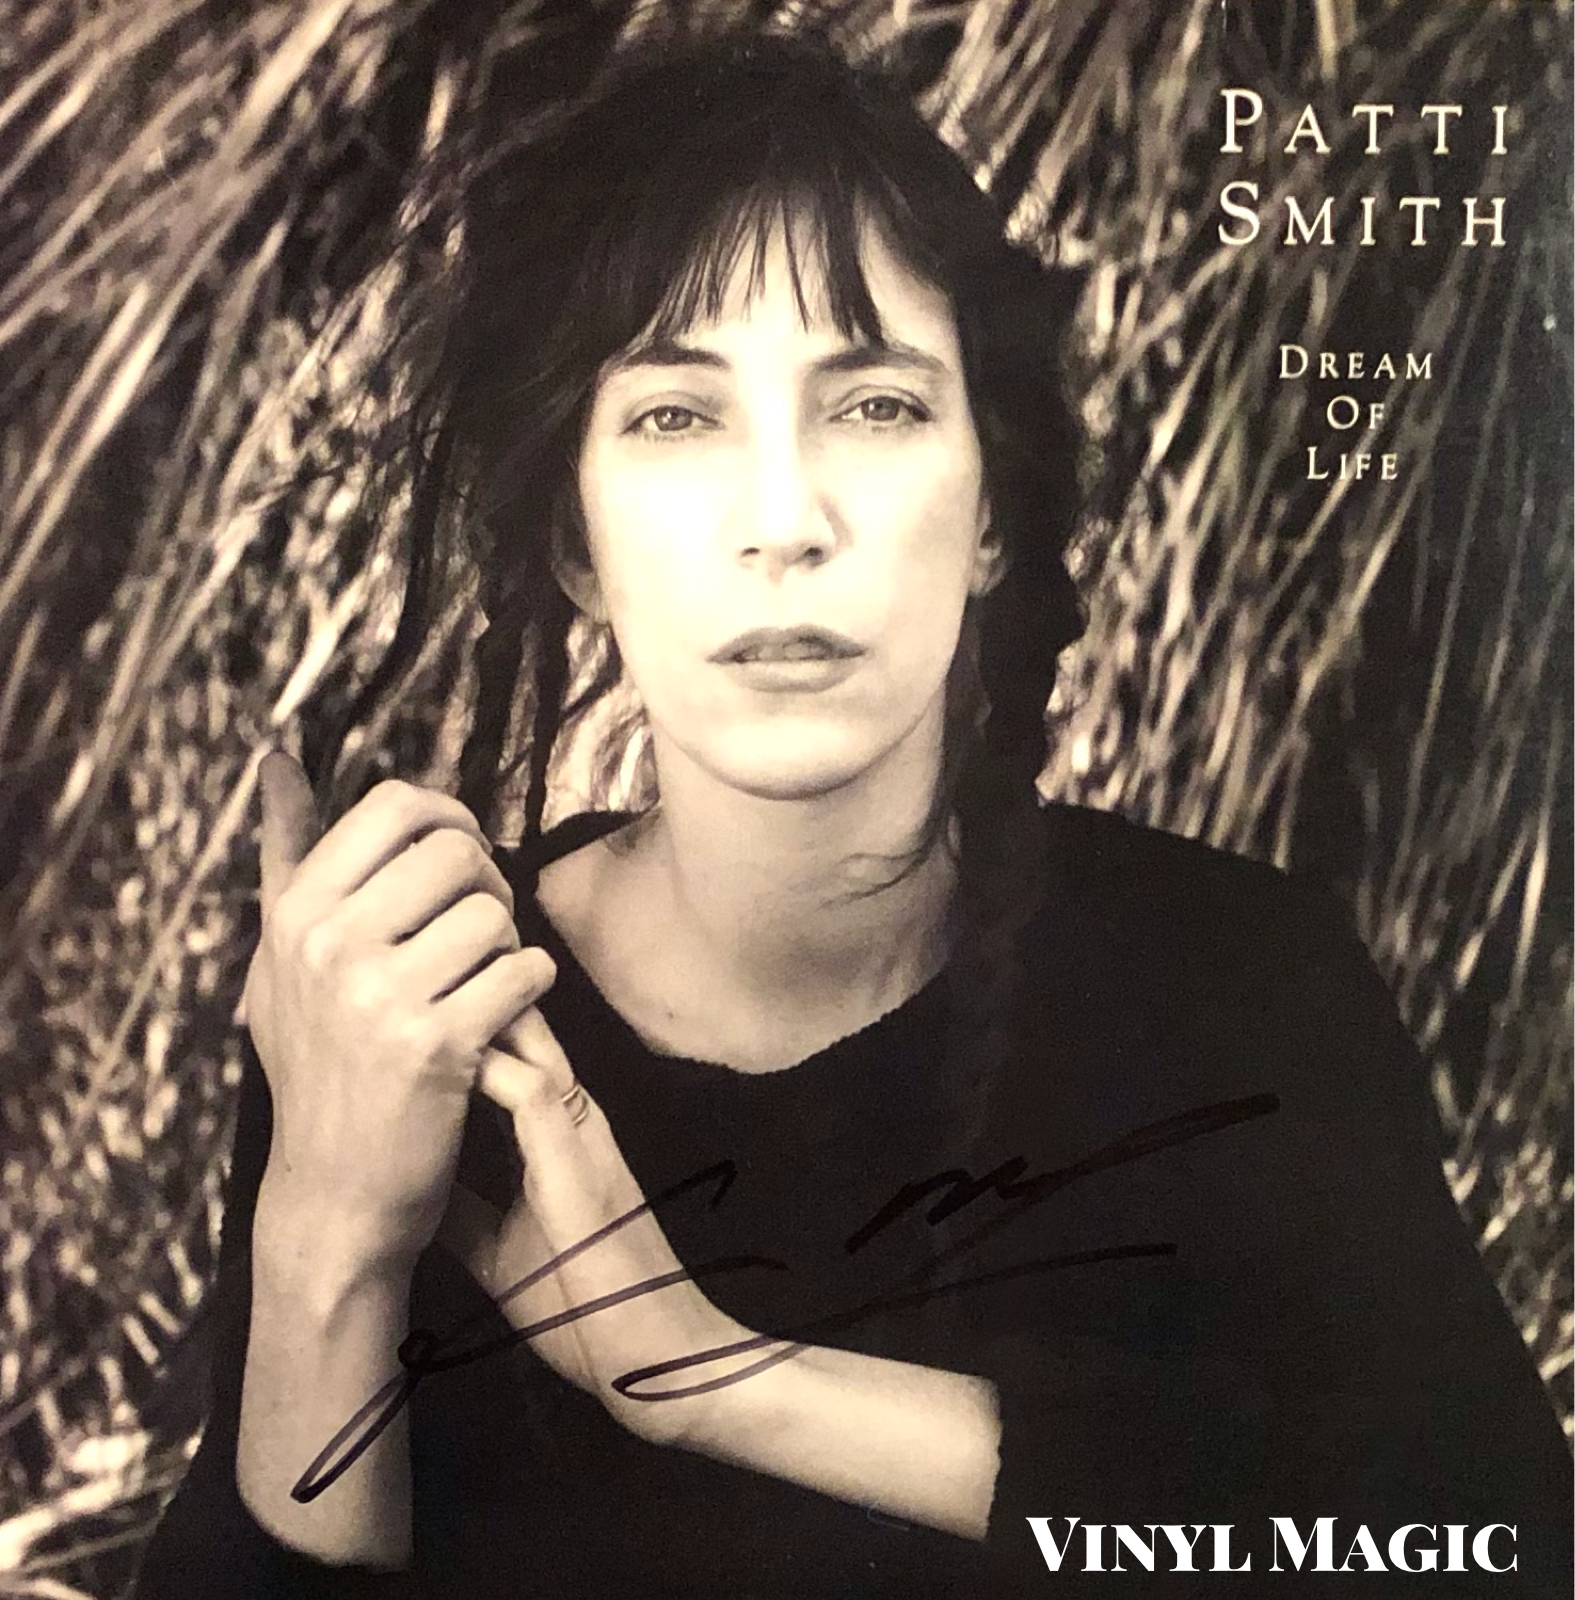 Patti Smith Rock and Roll HOF signed CD Cover Banga Beckett BAS Authentic 